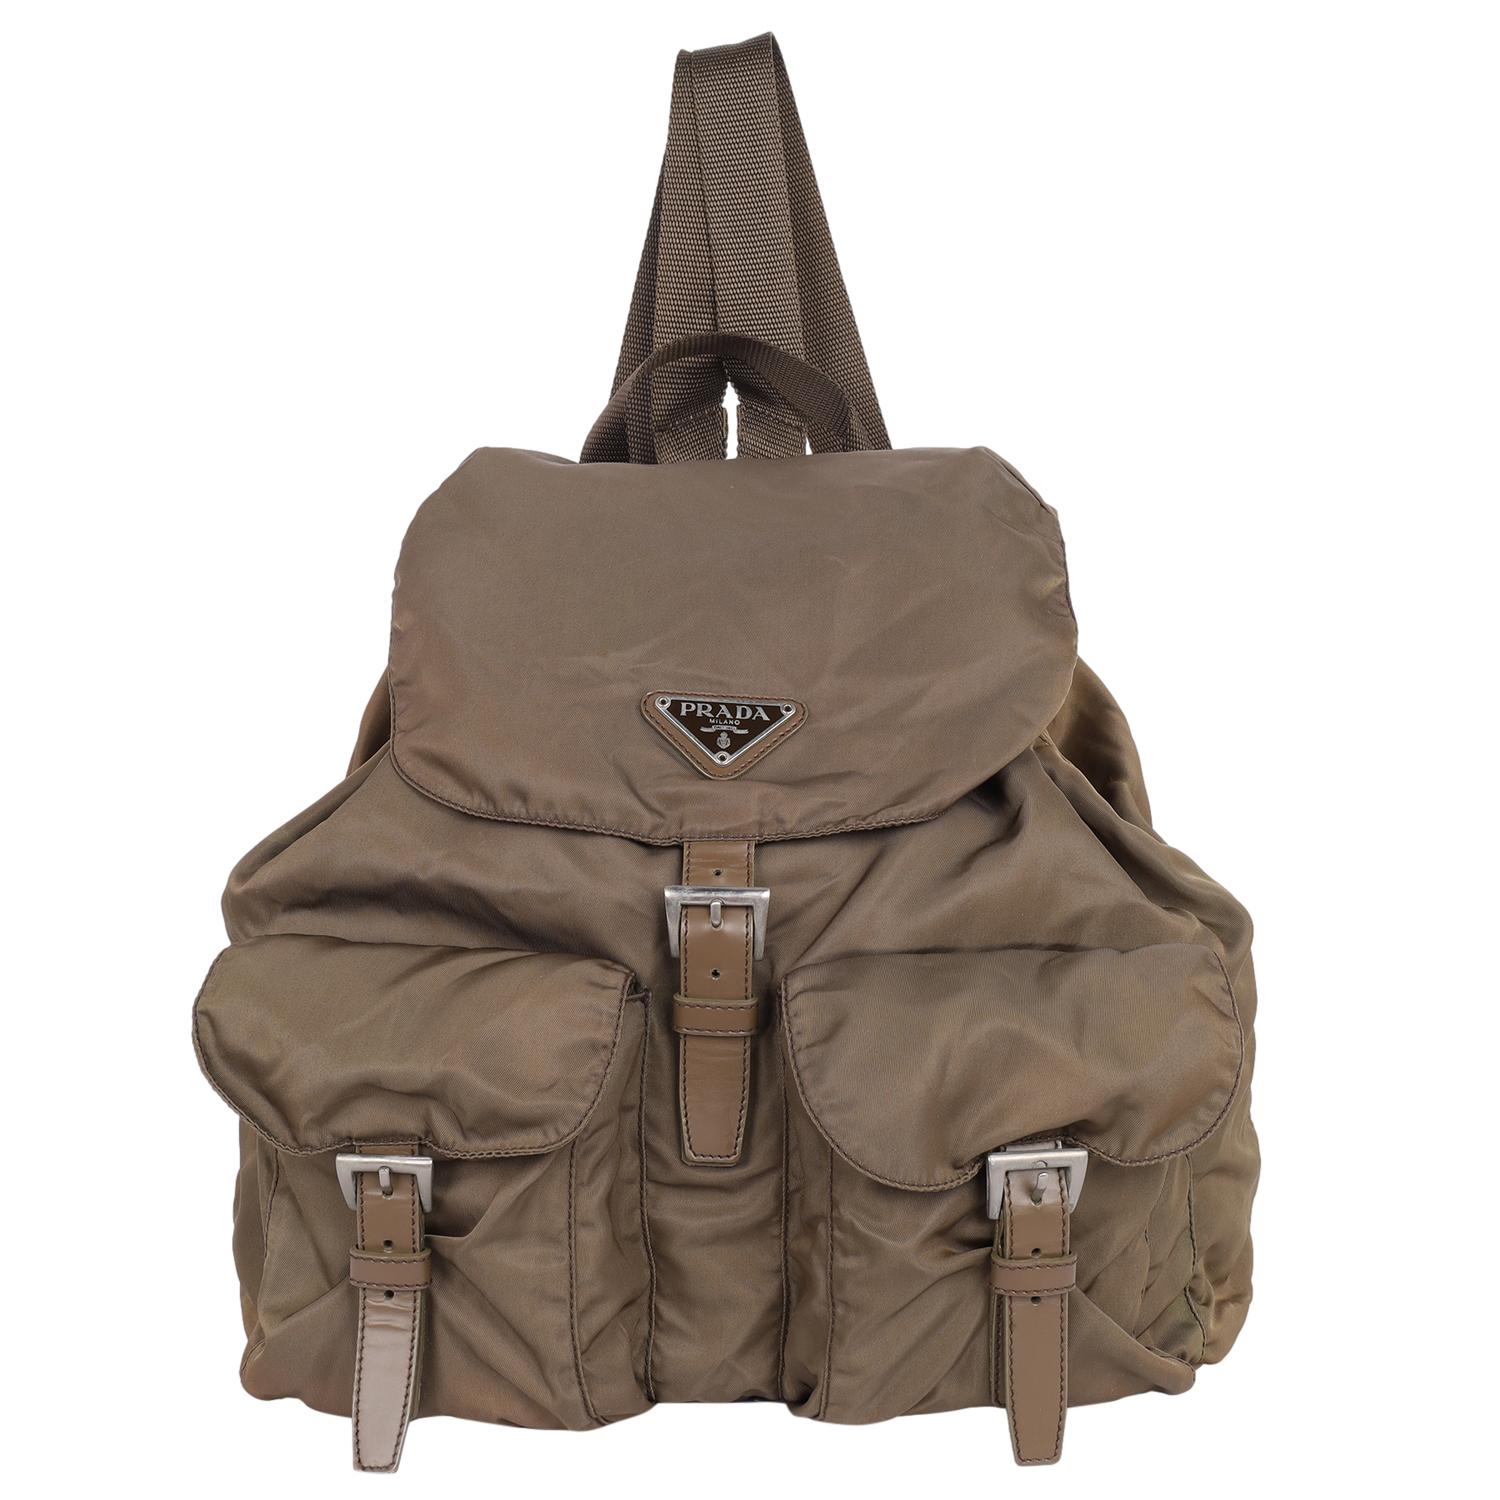 Authentic, pre-loved Prada Tessuto brown nylon drawstring backpack. This backpack features a nylon body, drawstring and buckle closure, flat back straps, drawstring closure, and exterior buckle pockets.

Made in Italy

11.5